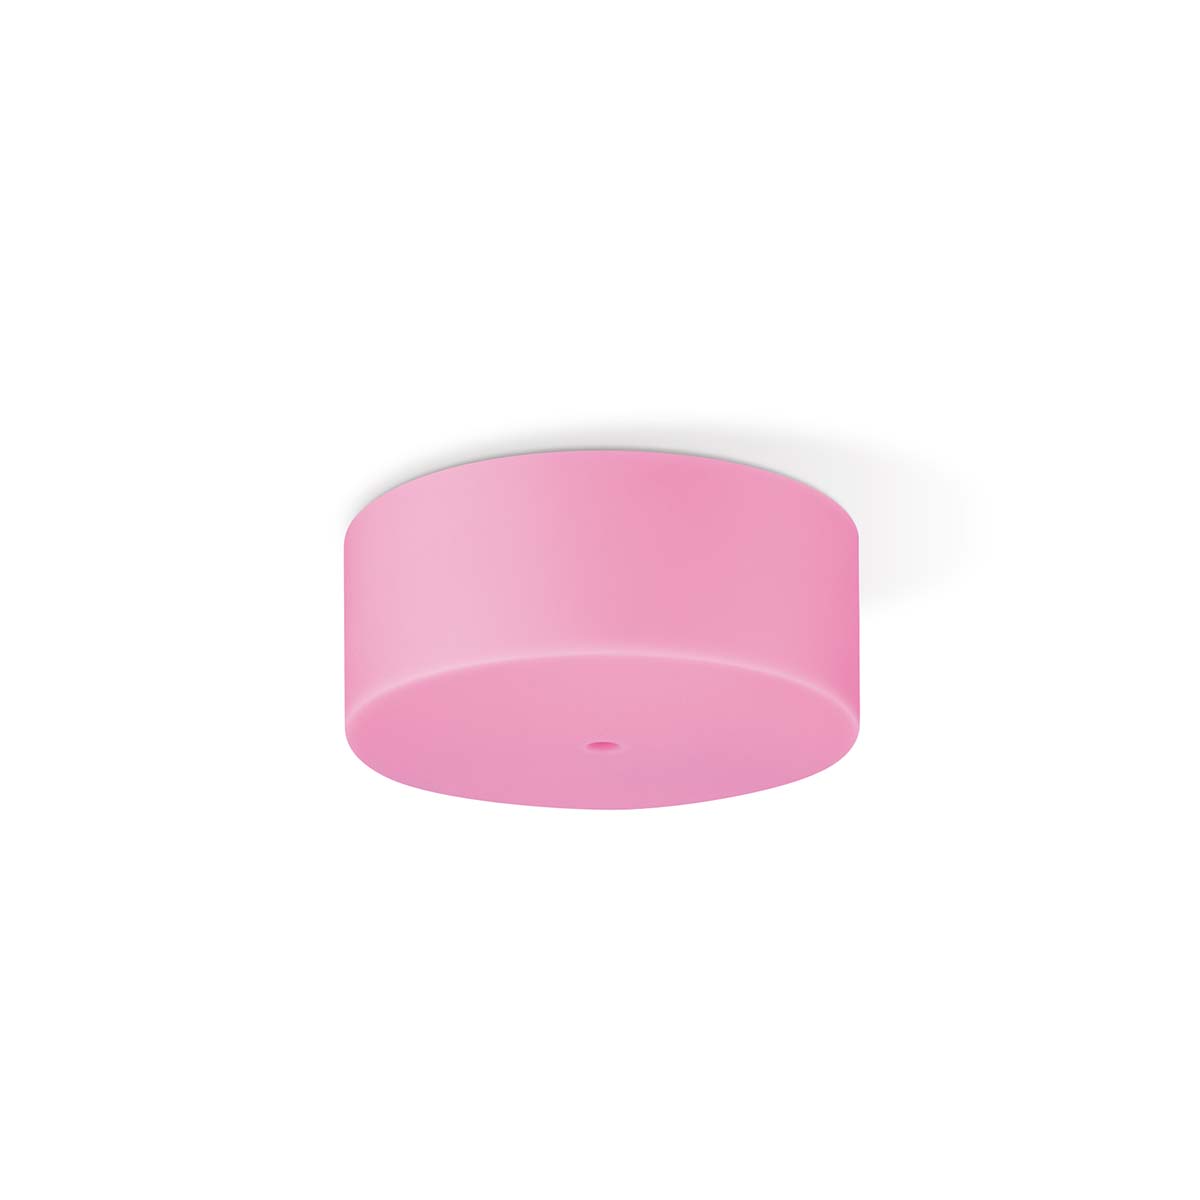 Tangla lighting - TLCP022-01PK - Silicon 1 Light round canopy cylinder - pink